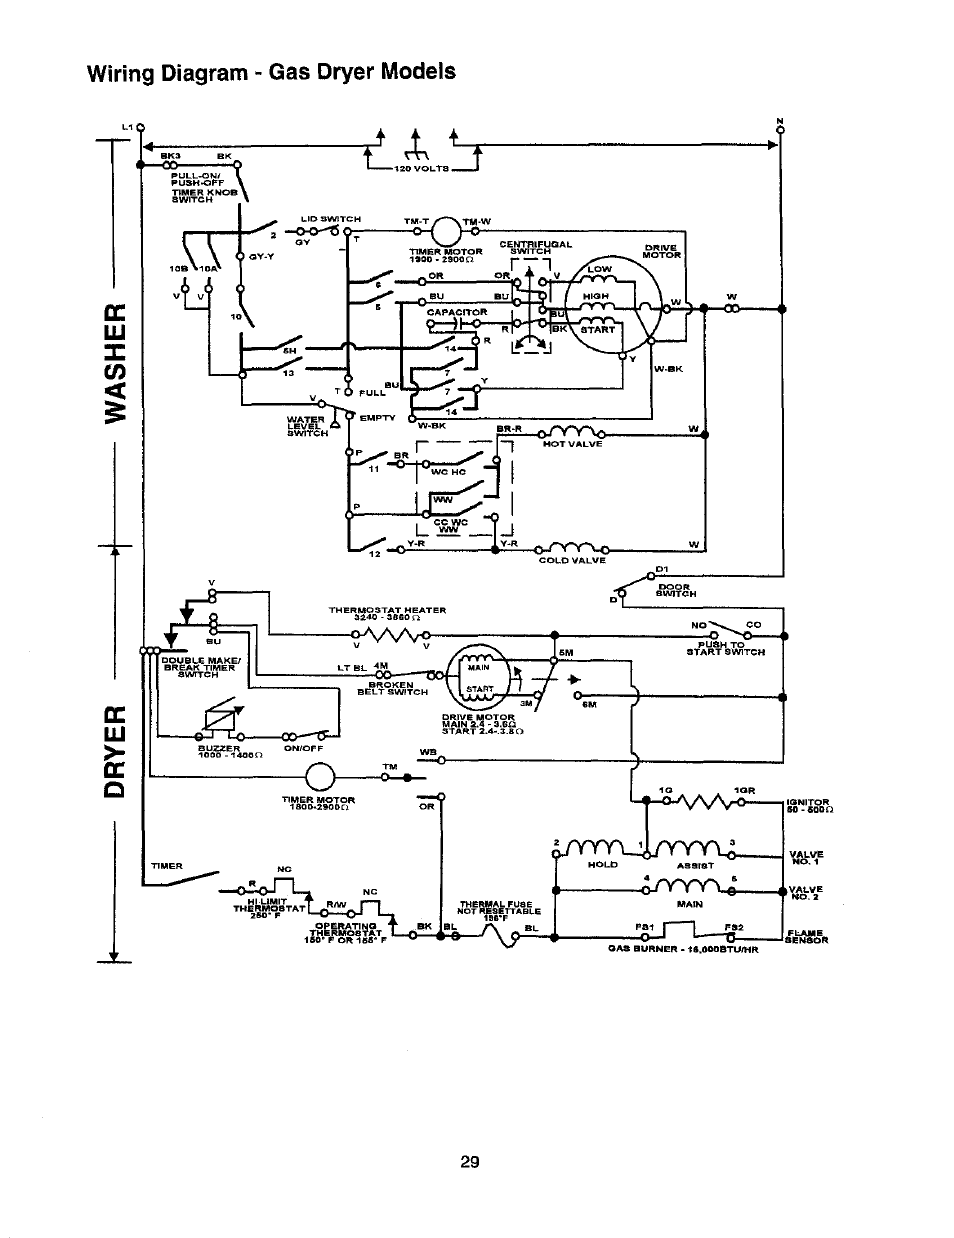 Wiring Diagram For A Kenmore Dryer from www.manualsdir.com